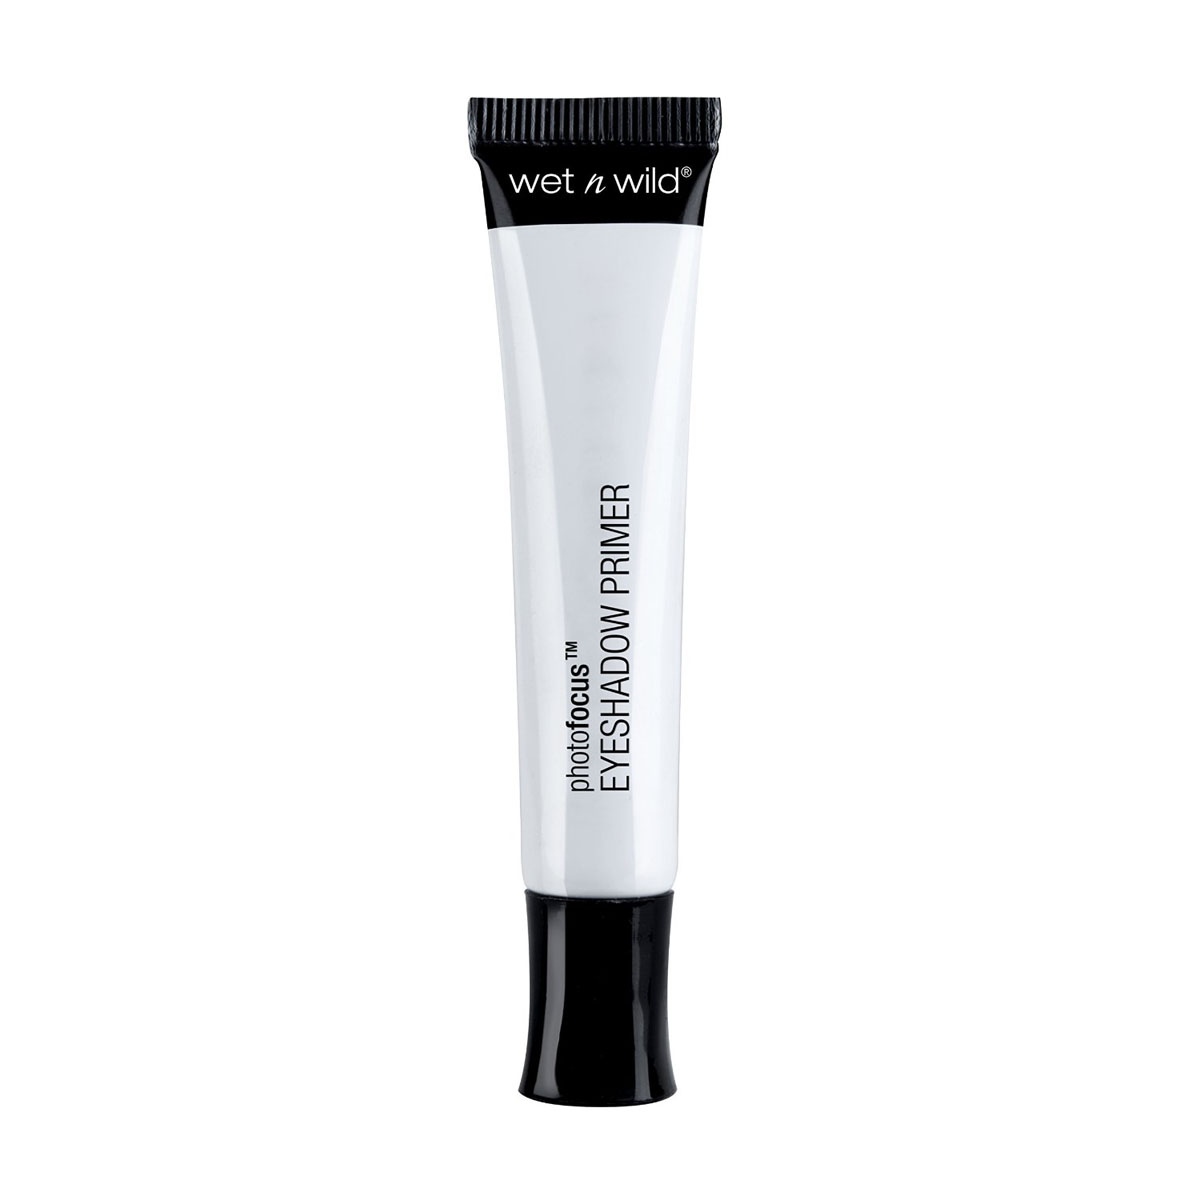 wet n wild Only a Matter of Prime Photo Focus Eye Shadow Primer